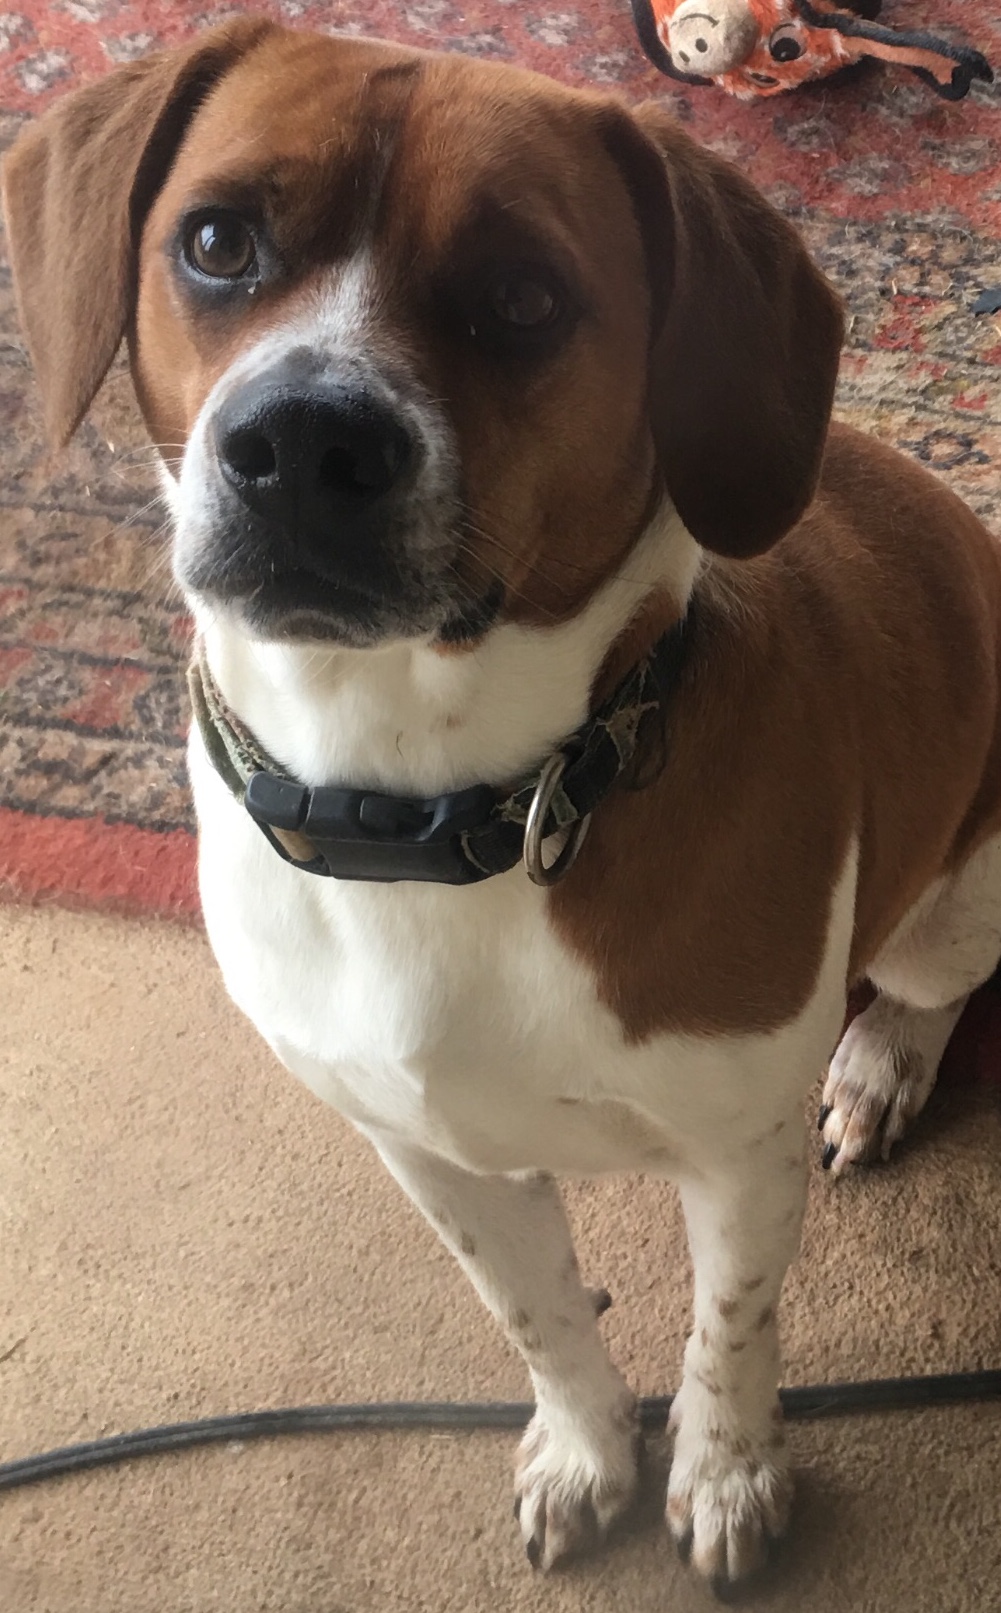 Image of Roscoe, Lost Dog